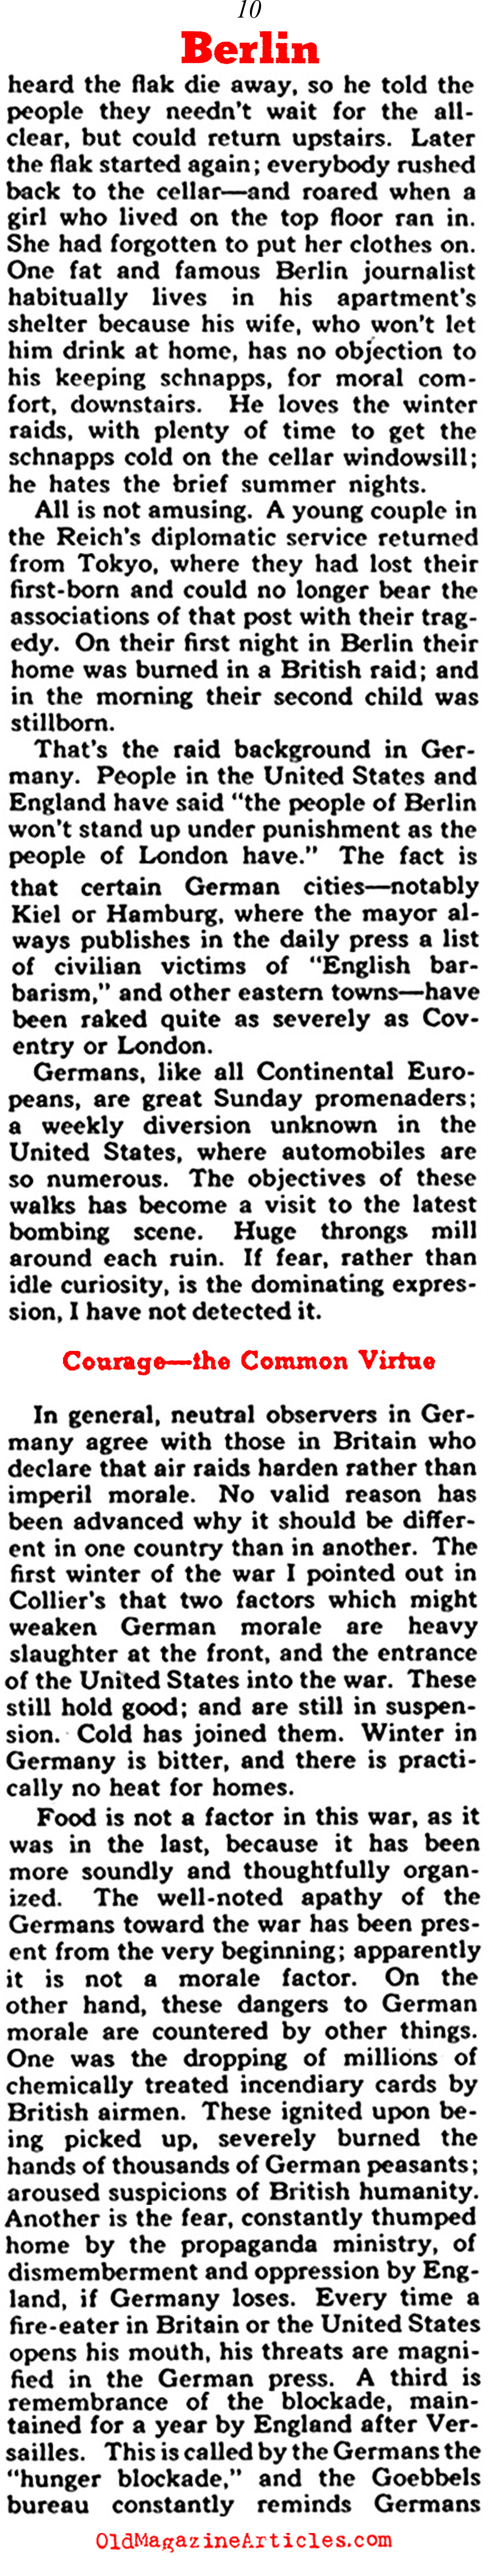 How Much Can the Germans Take? (Collier's Magazine, 1941)